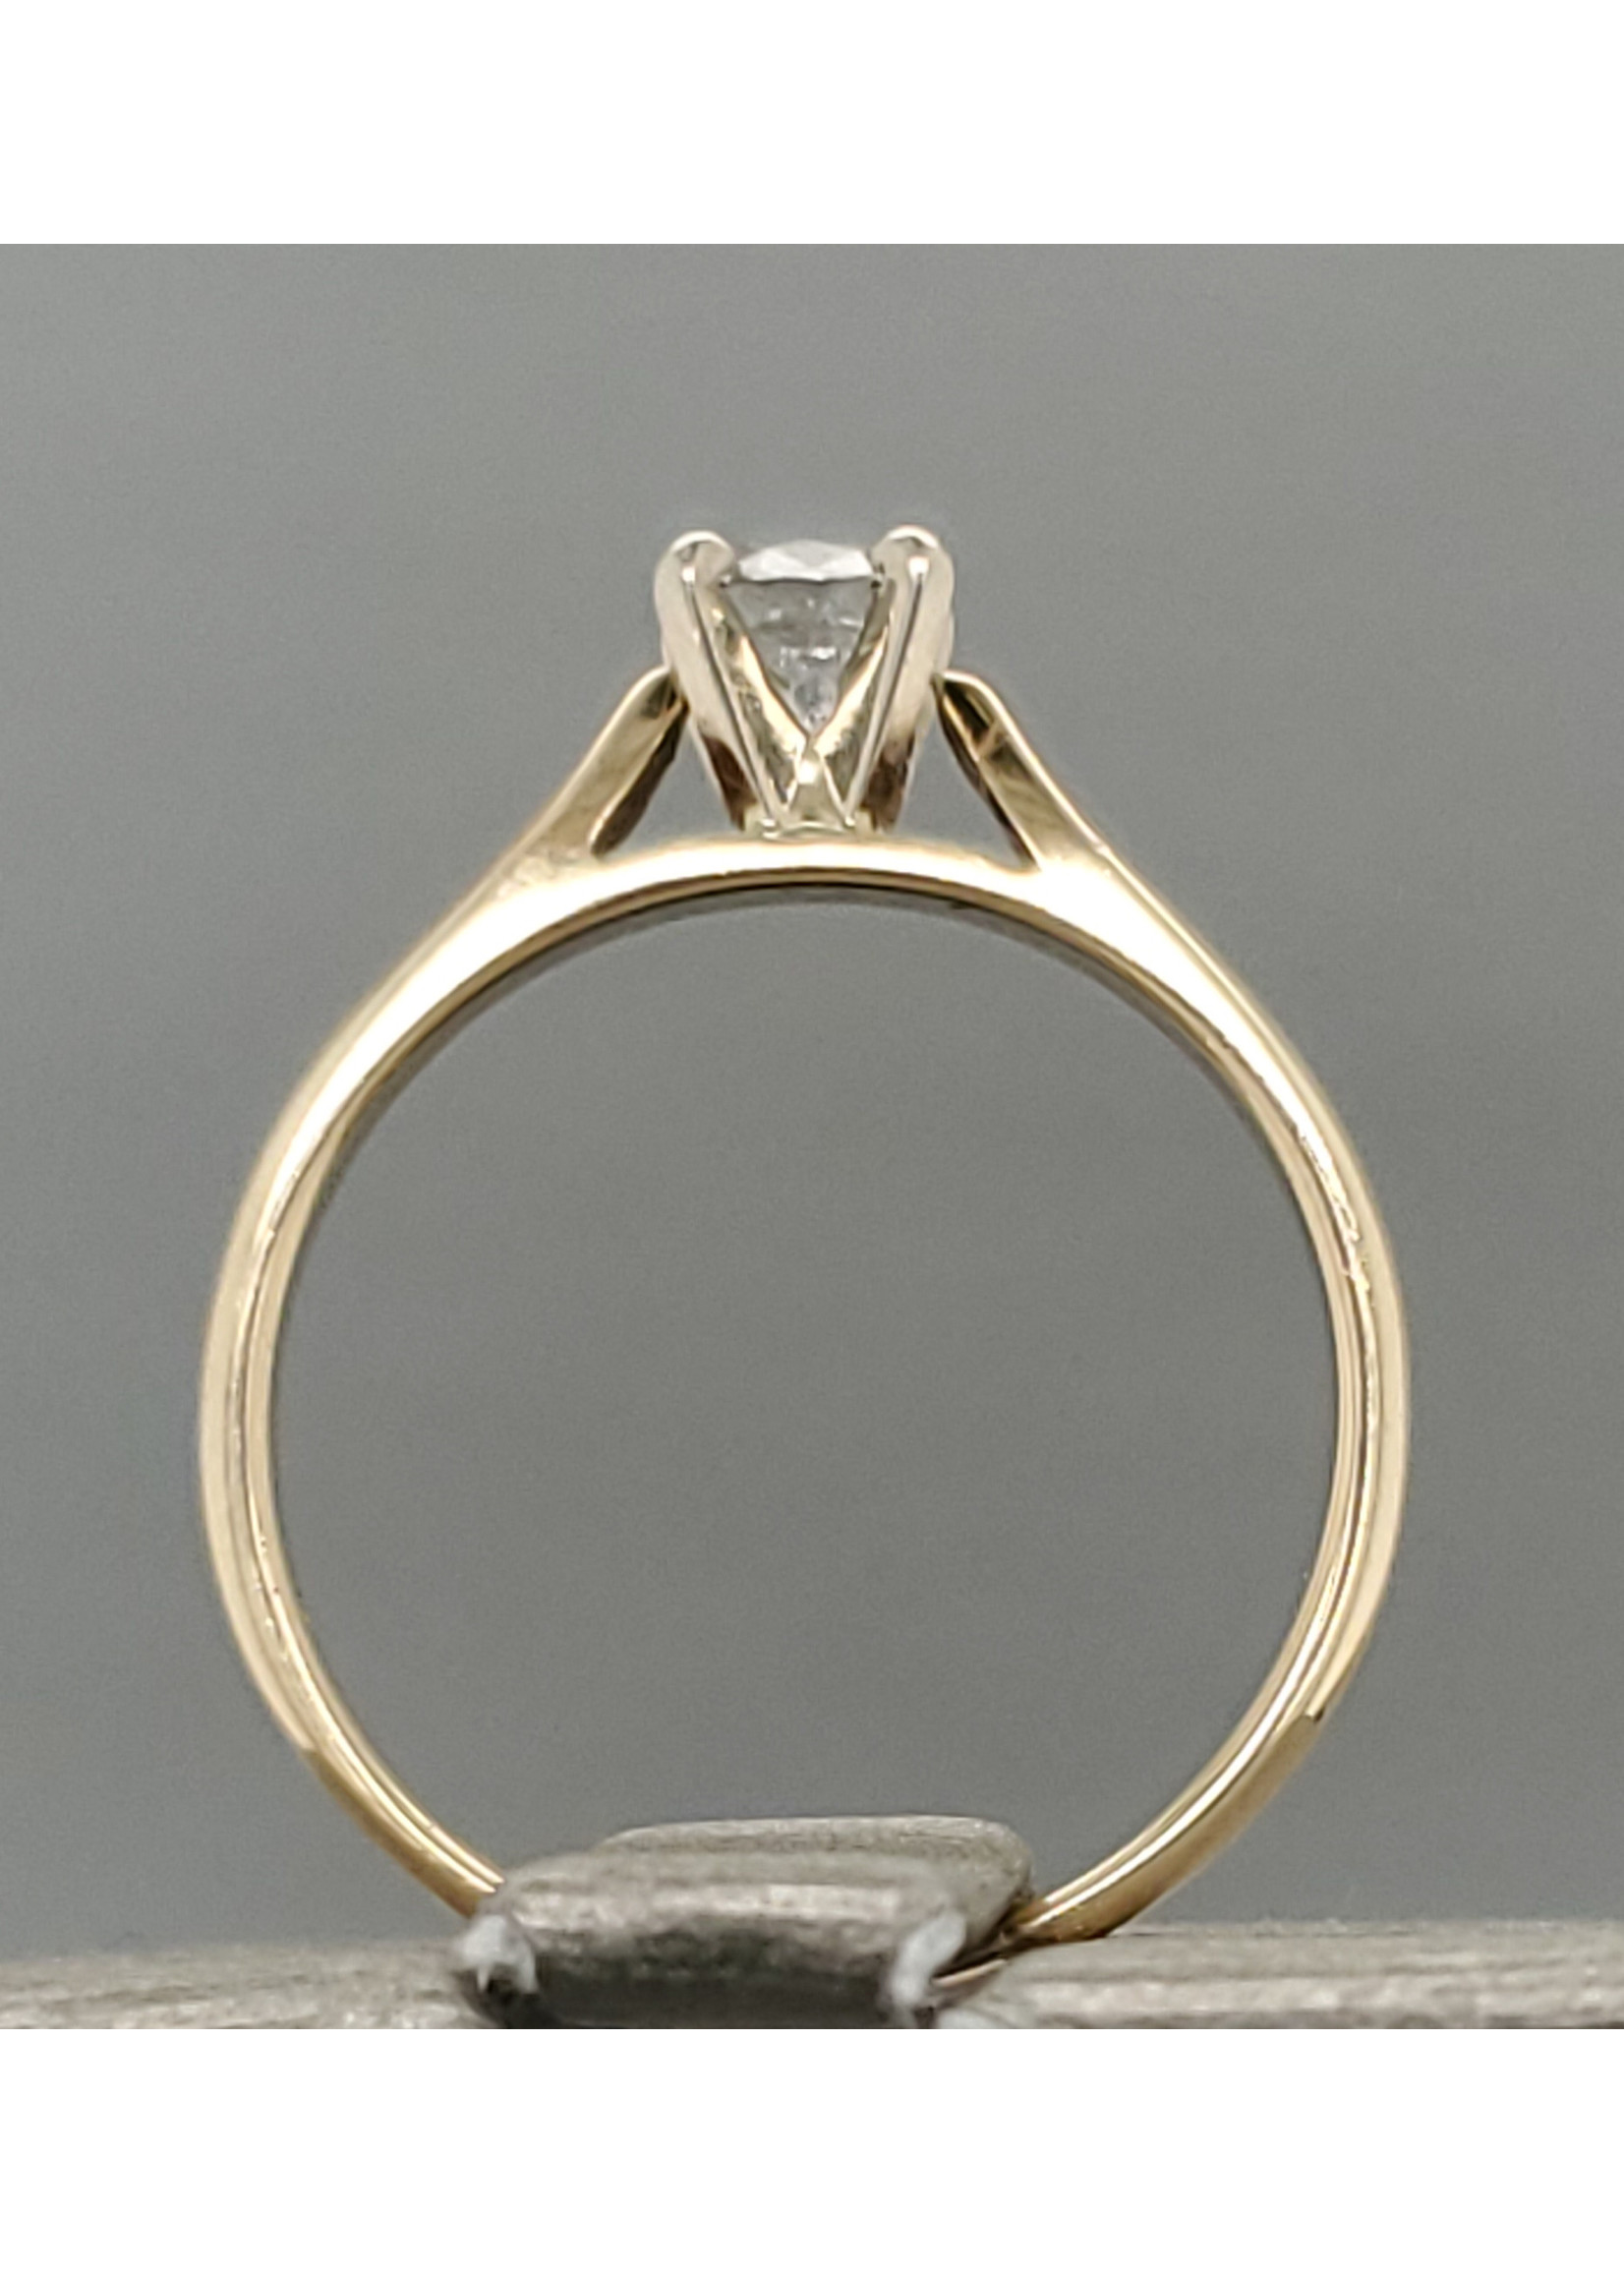 Vintage Jewellery Vintage 14k Solitaire Ring | Sz 6.25 1.8mm band